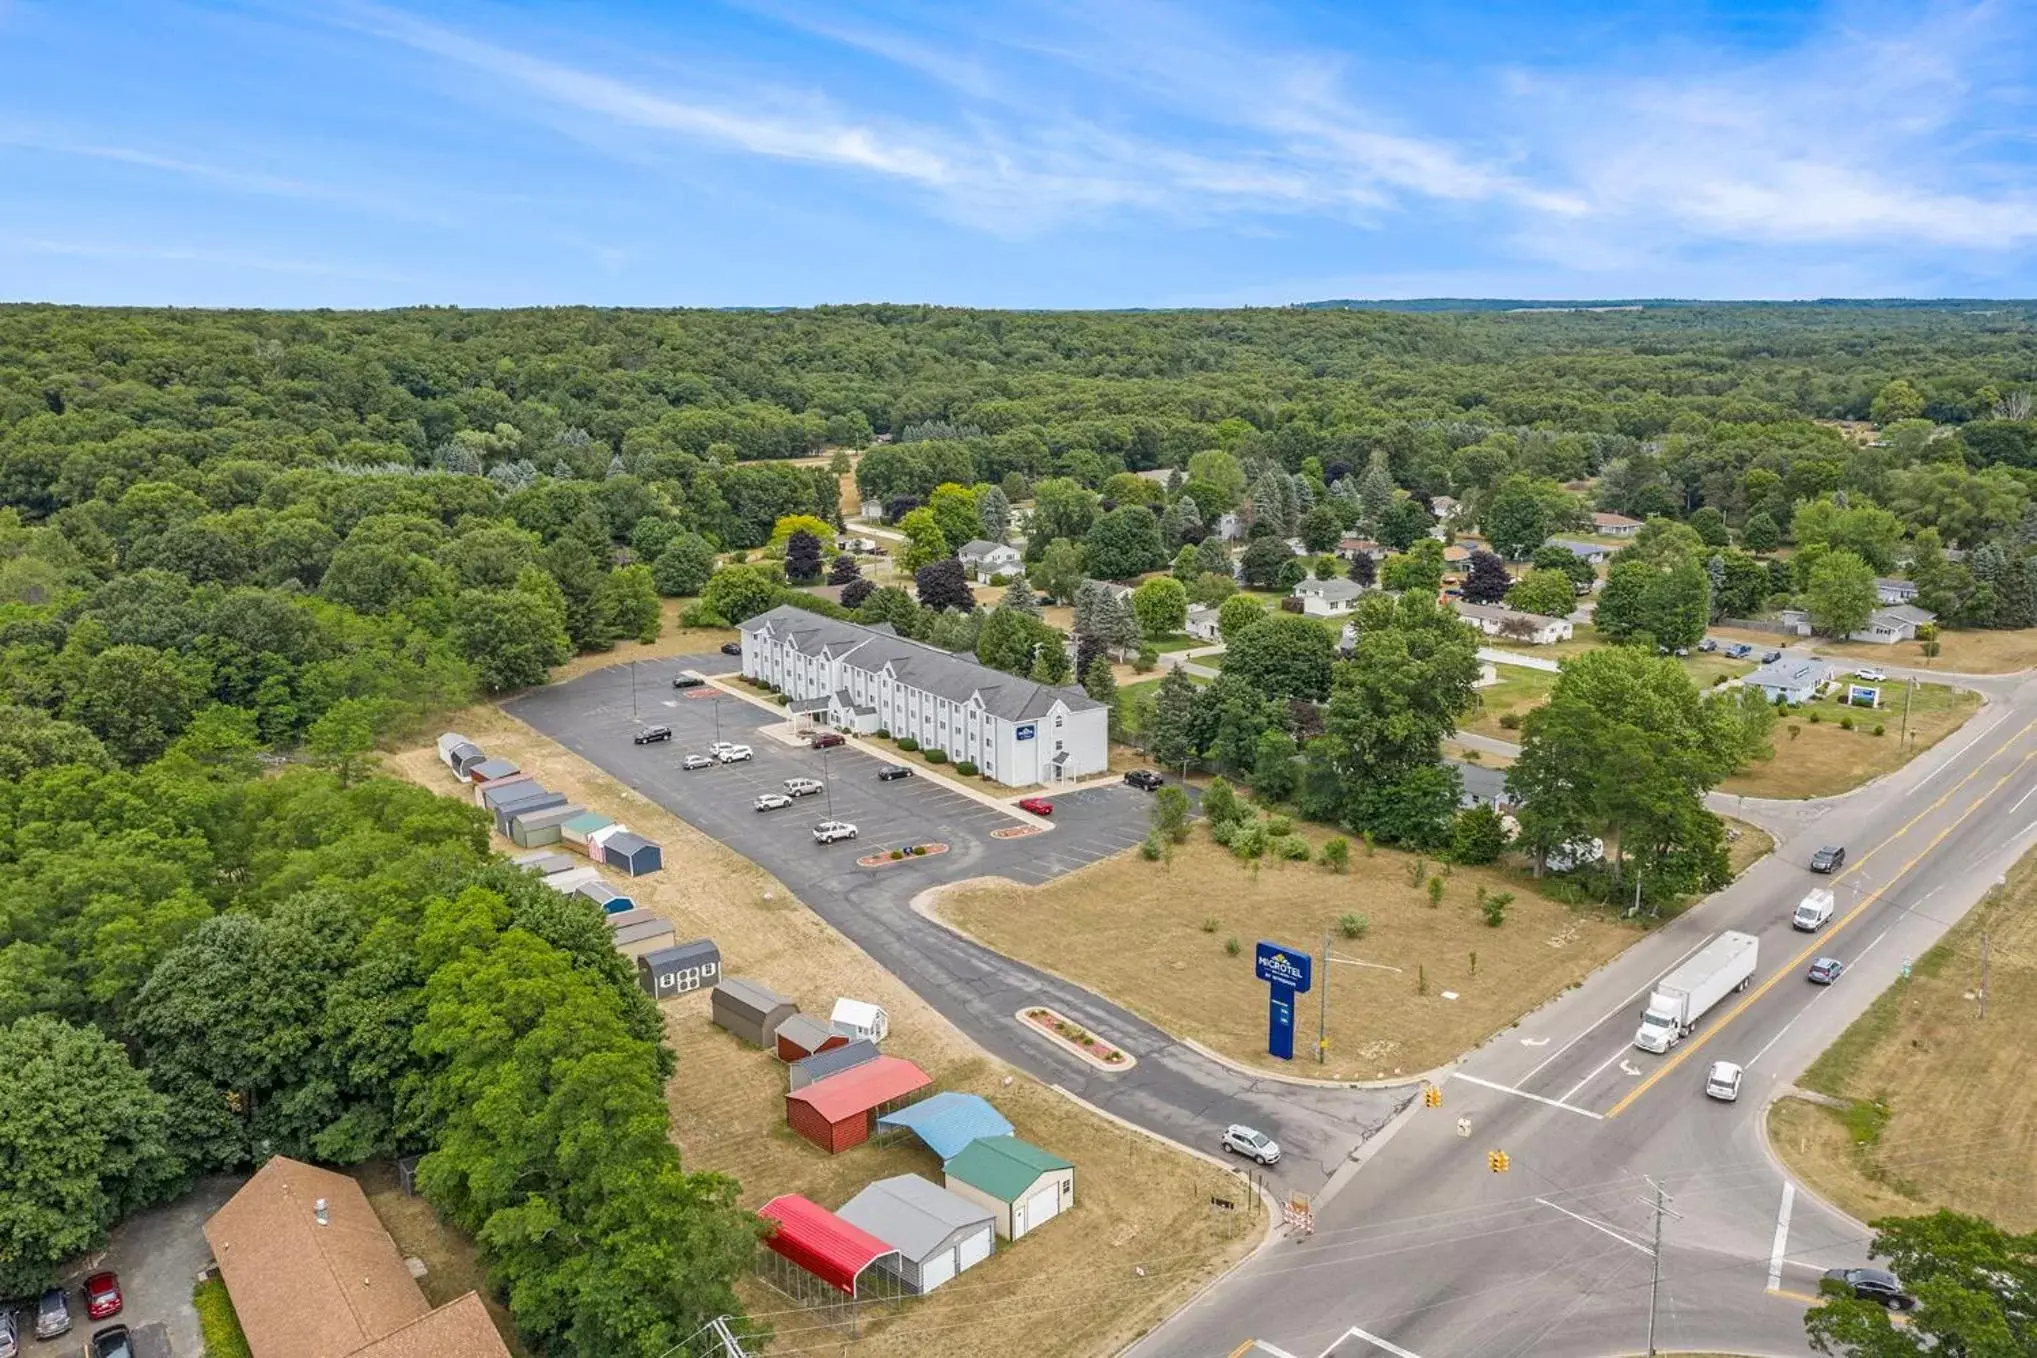 Property building, Bird's-eye View in Microtel Inn and Suites Manistee